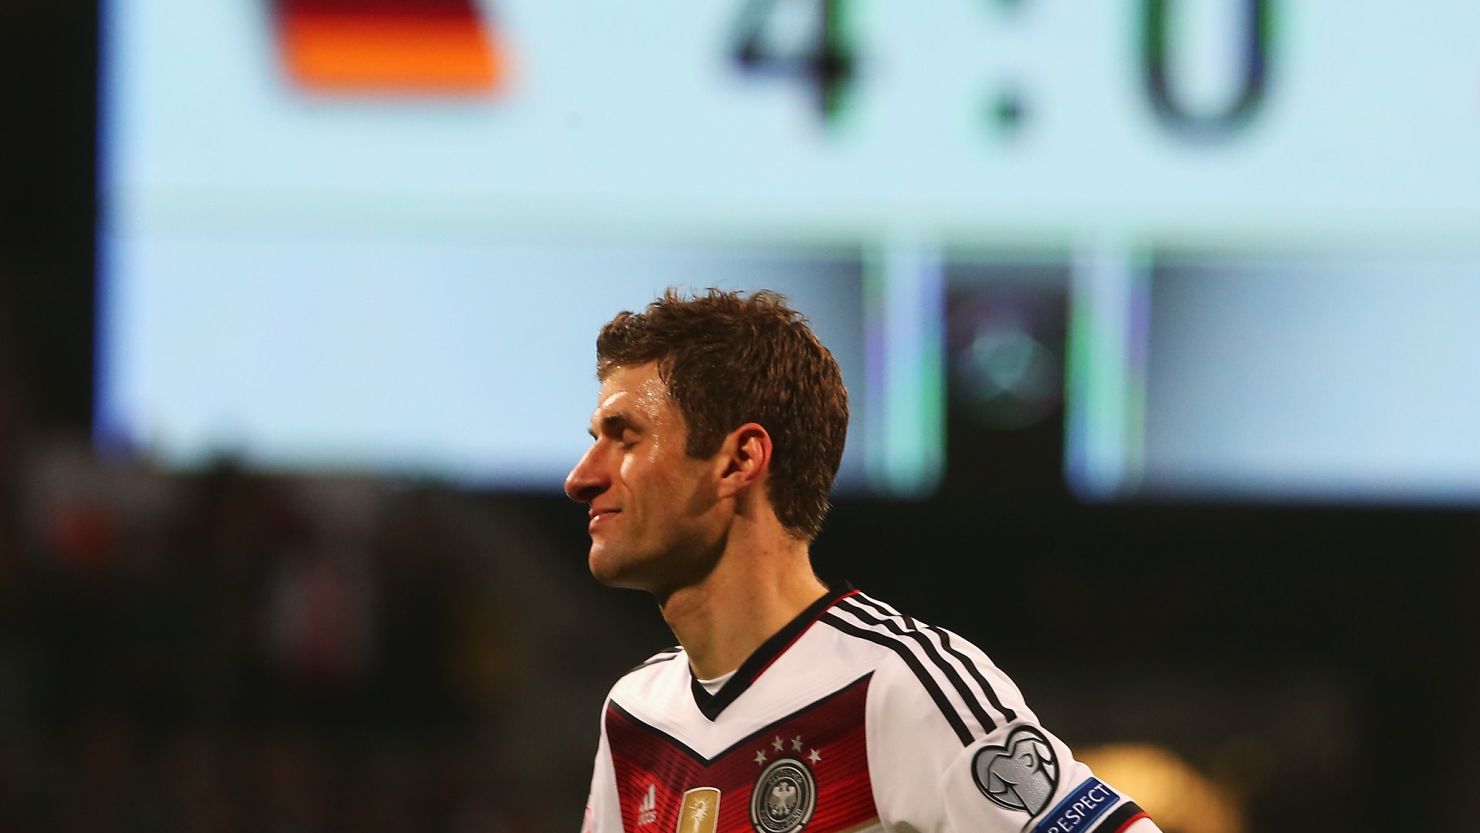 Every picture tells a story. Two-goal Thomas Muller reflects on Germany's 4-0 scoreline against Gibraltar.